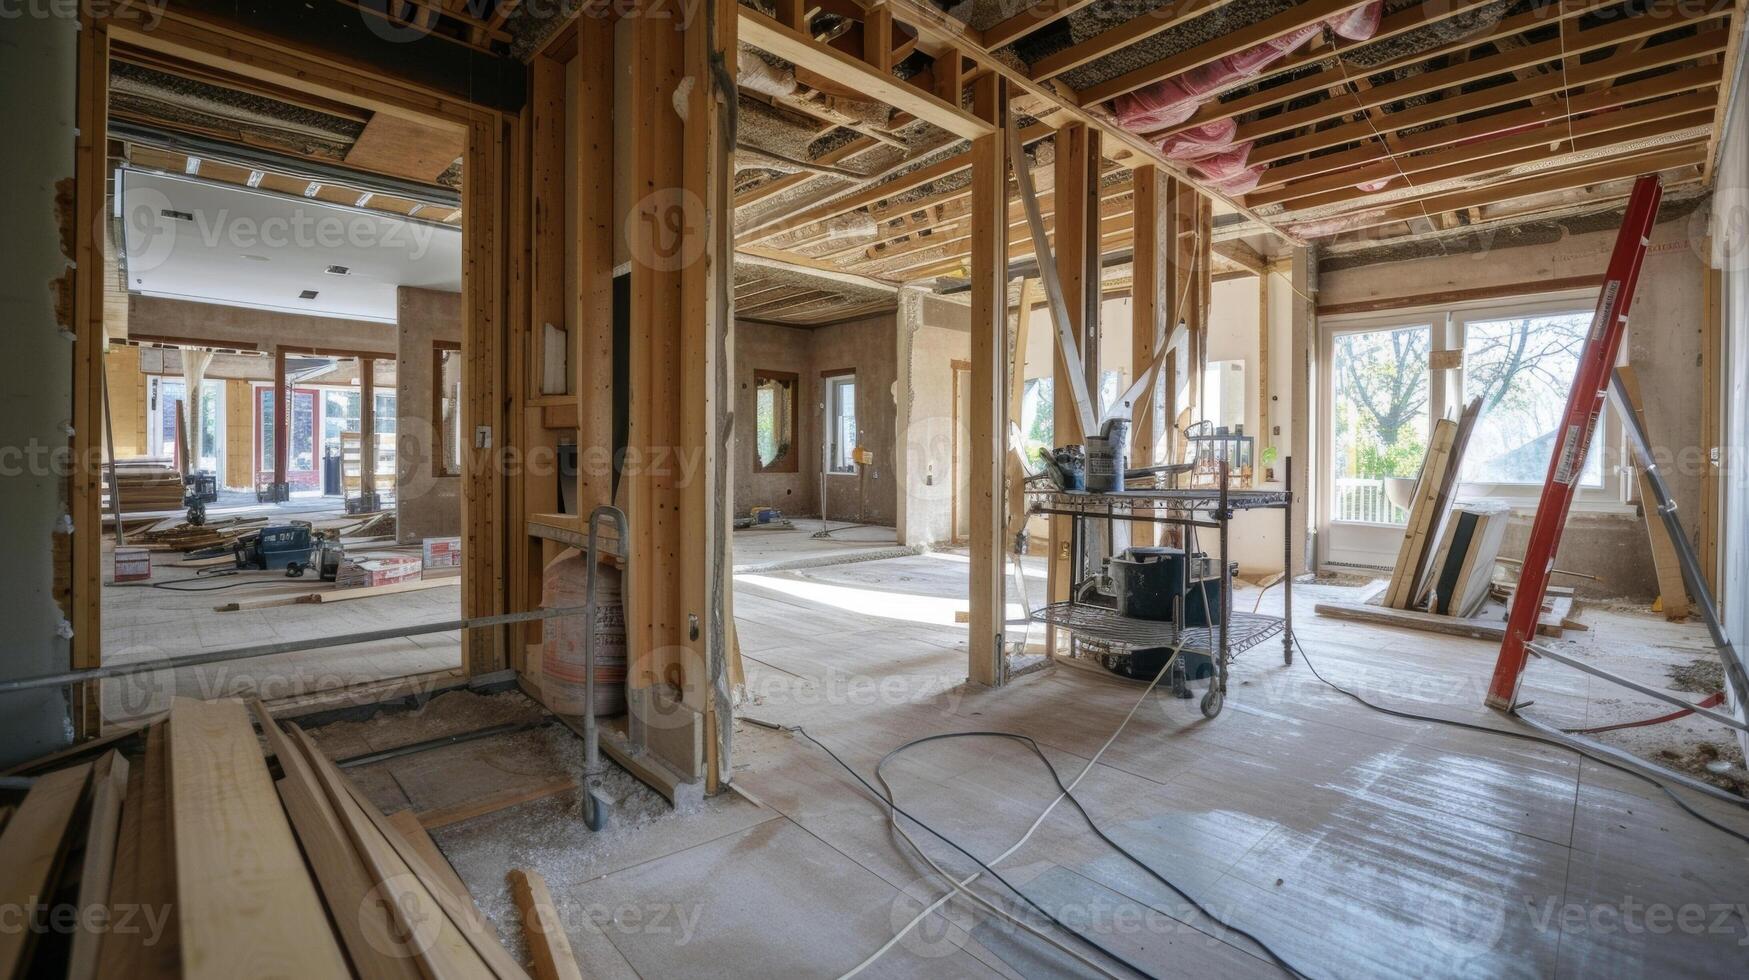 In the midst of a wholehome renovation a general contractor is in constant communication with all subcontractors ensuring that each part of the project is being complete photo